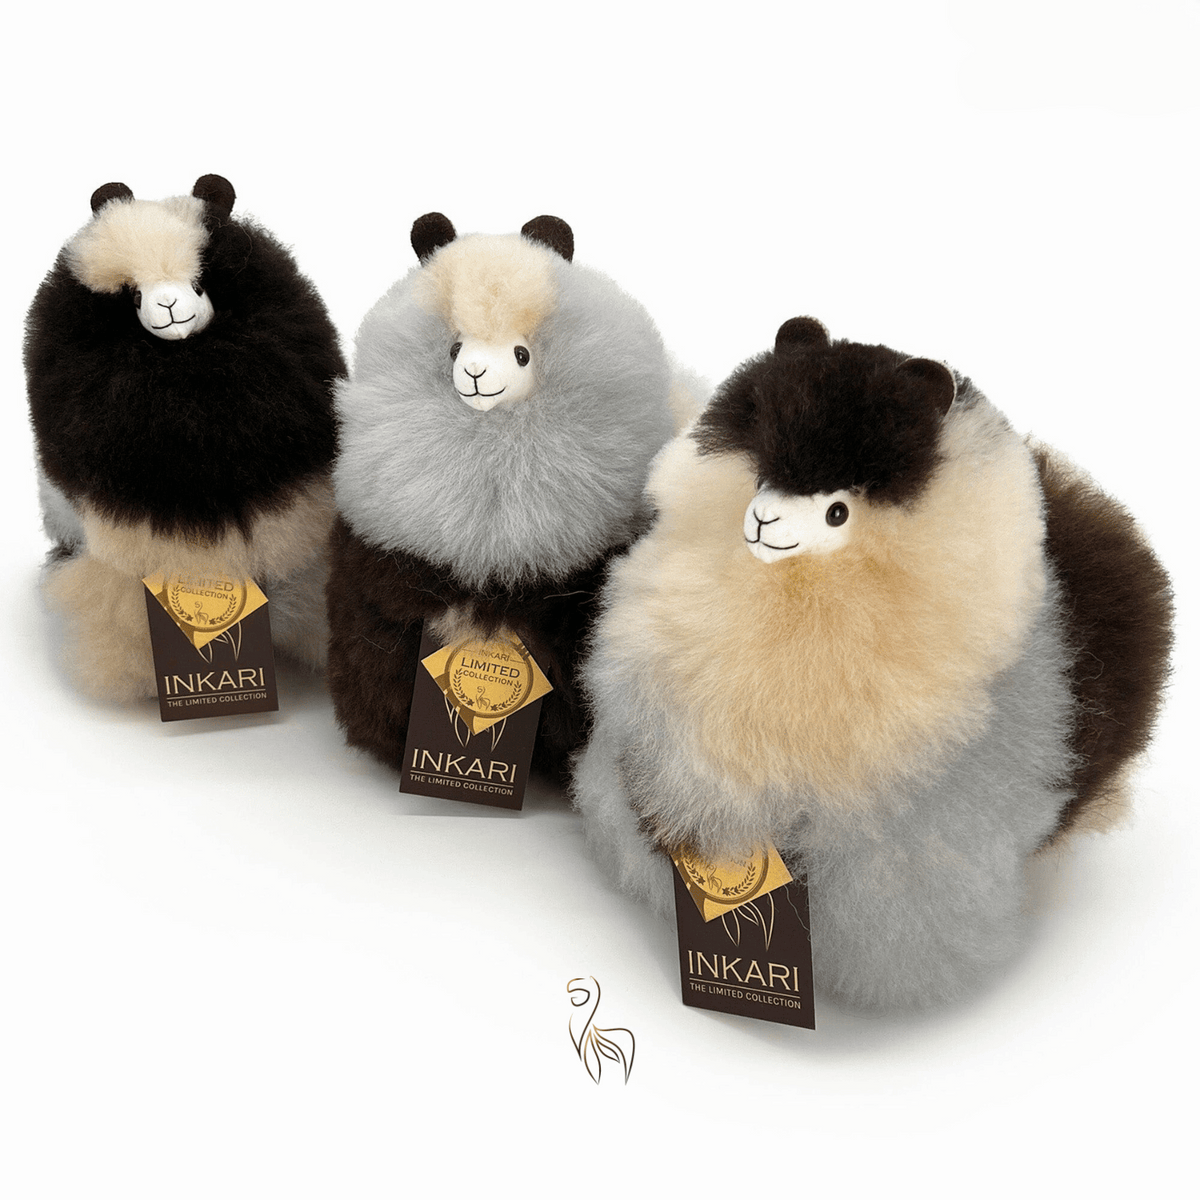 Winter Badger - Small Alpaca Toy (23cm) - Limited Edition